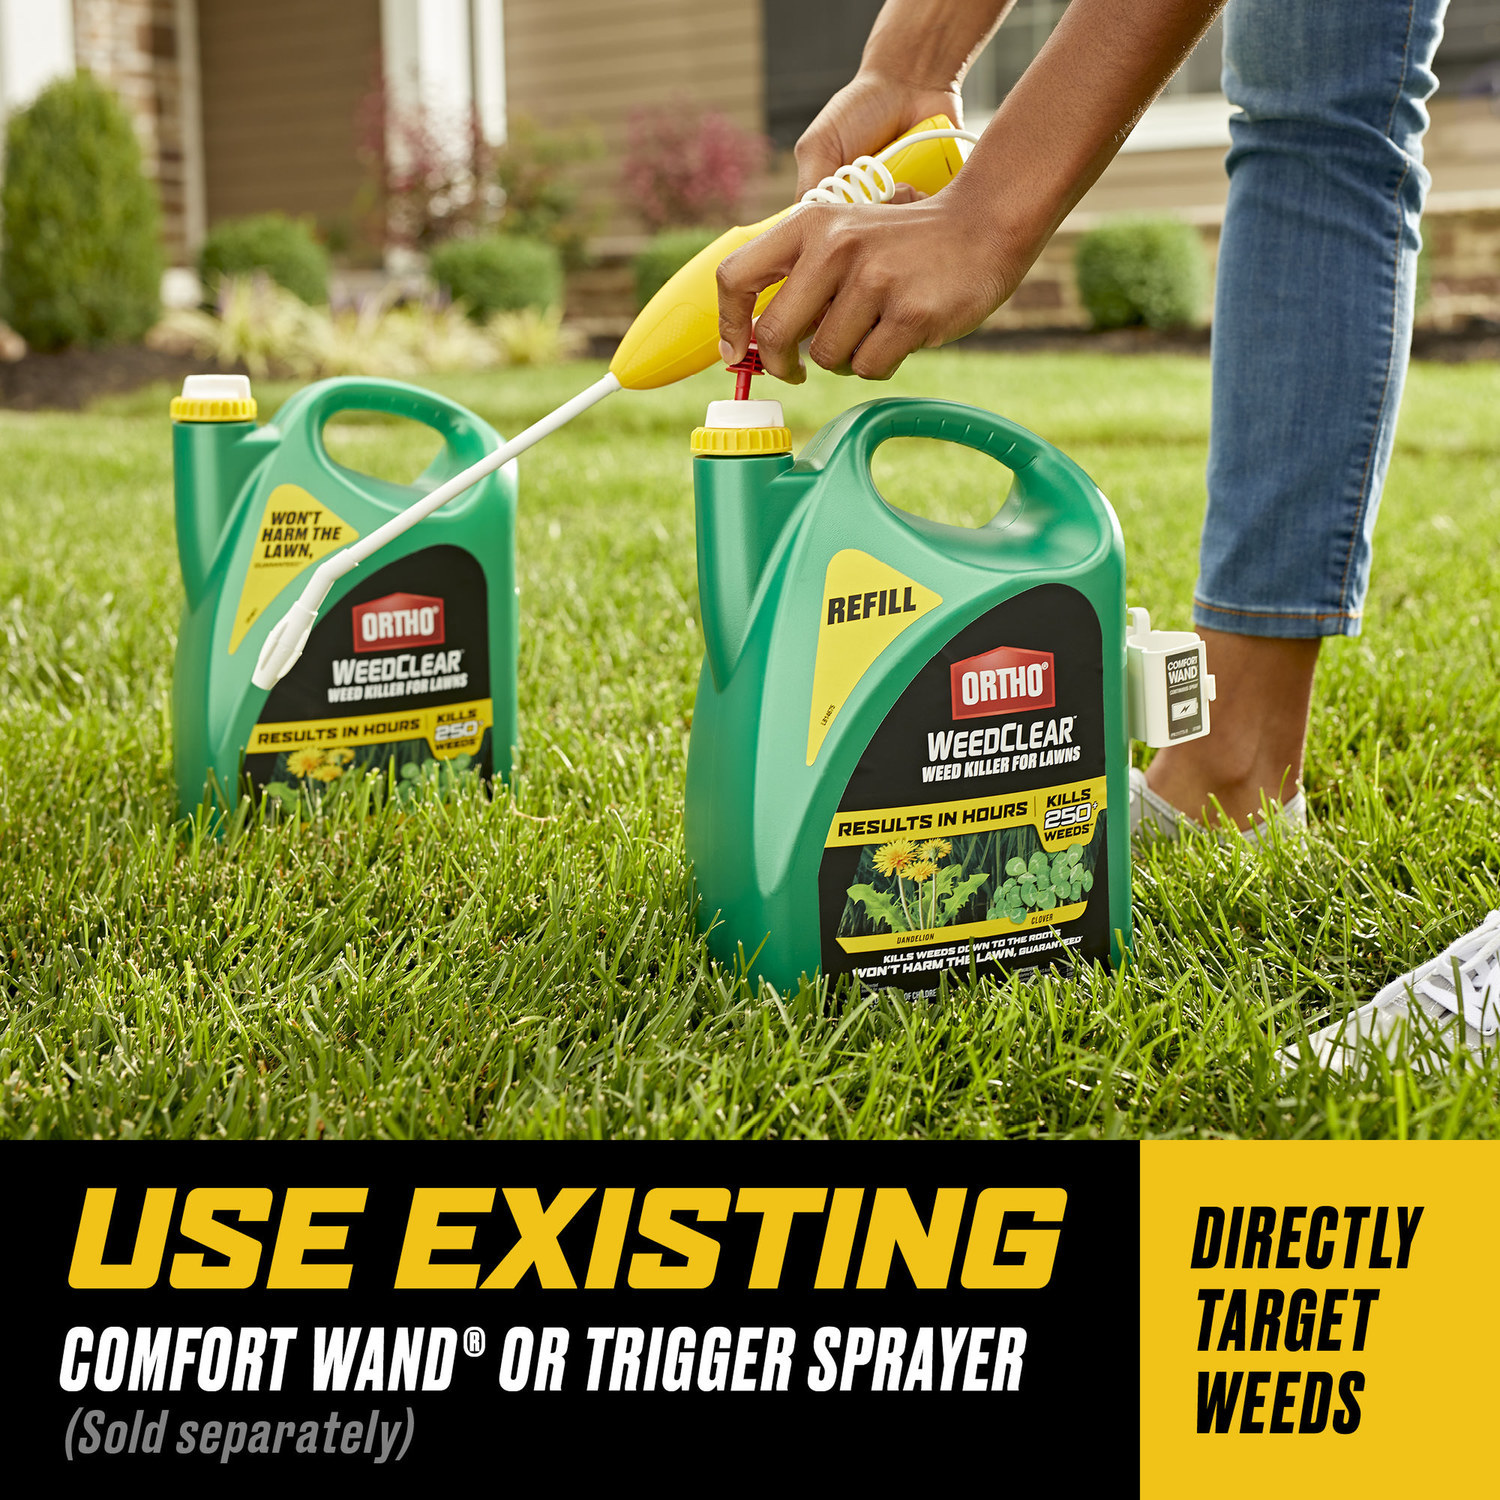 Ortho® WeedClear Weed Killer for Lawns